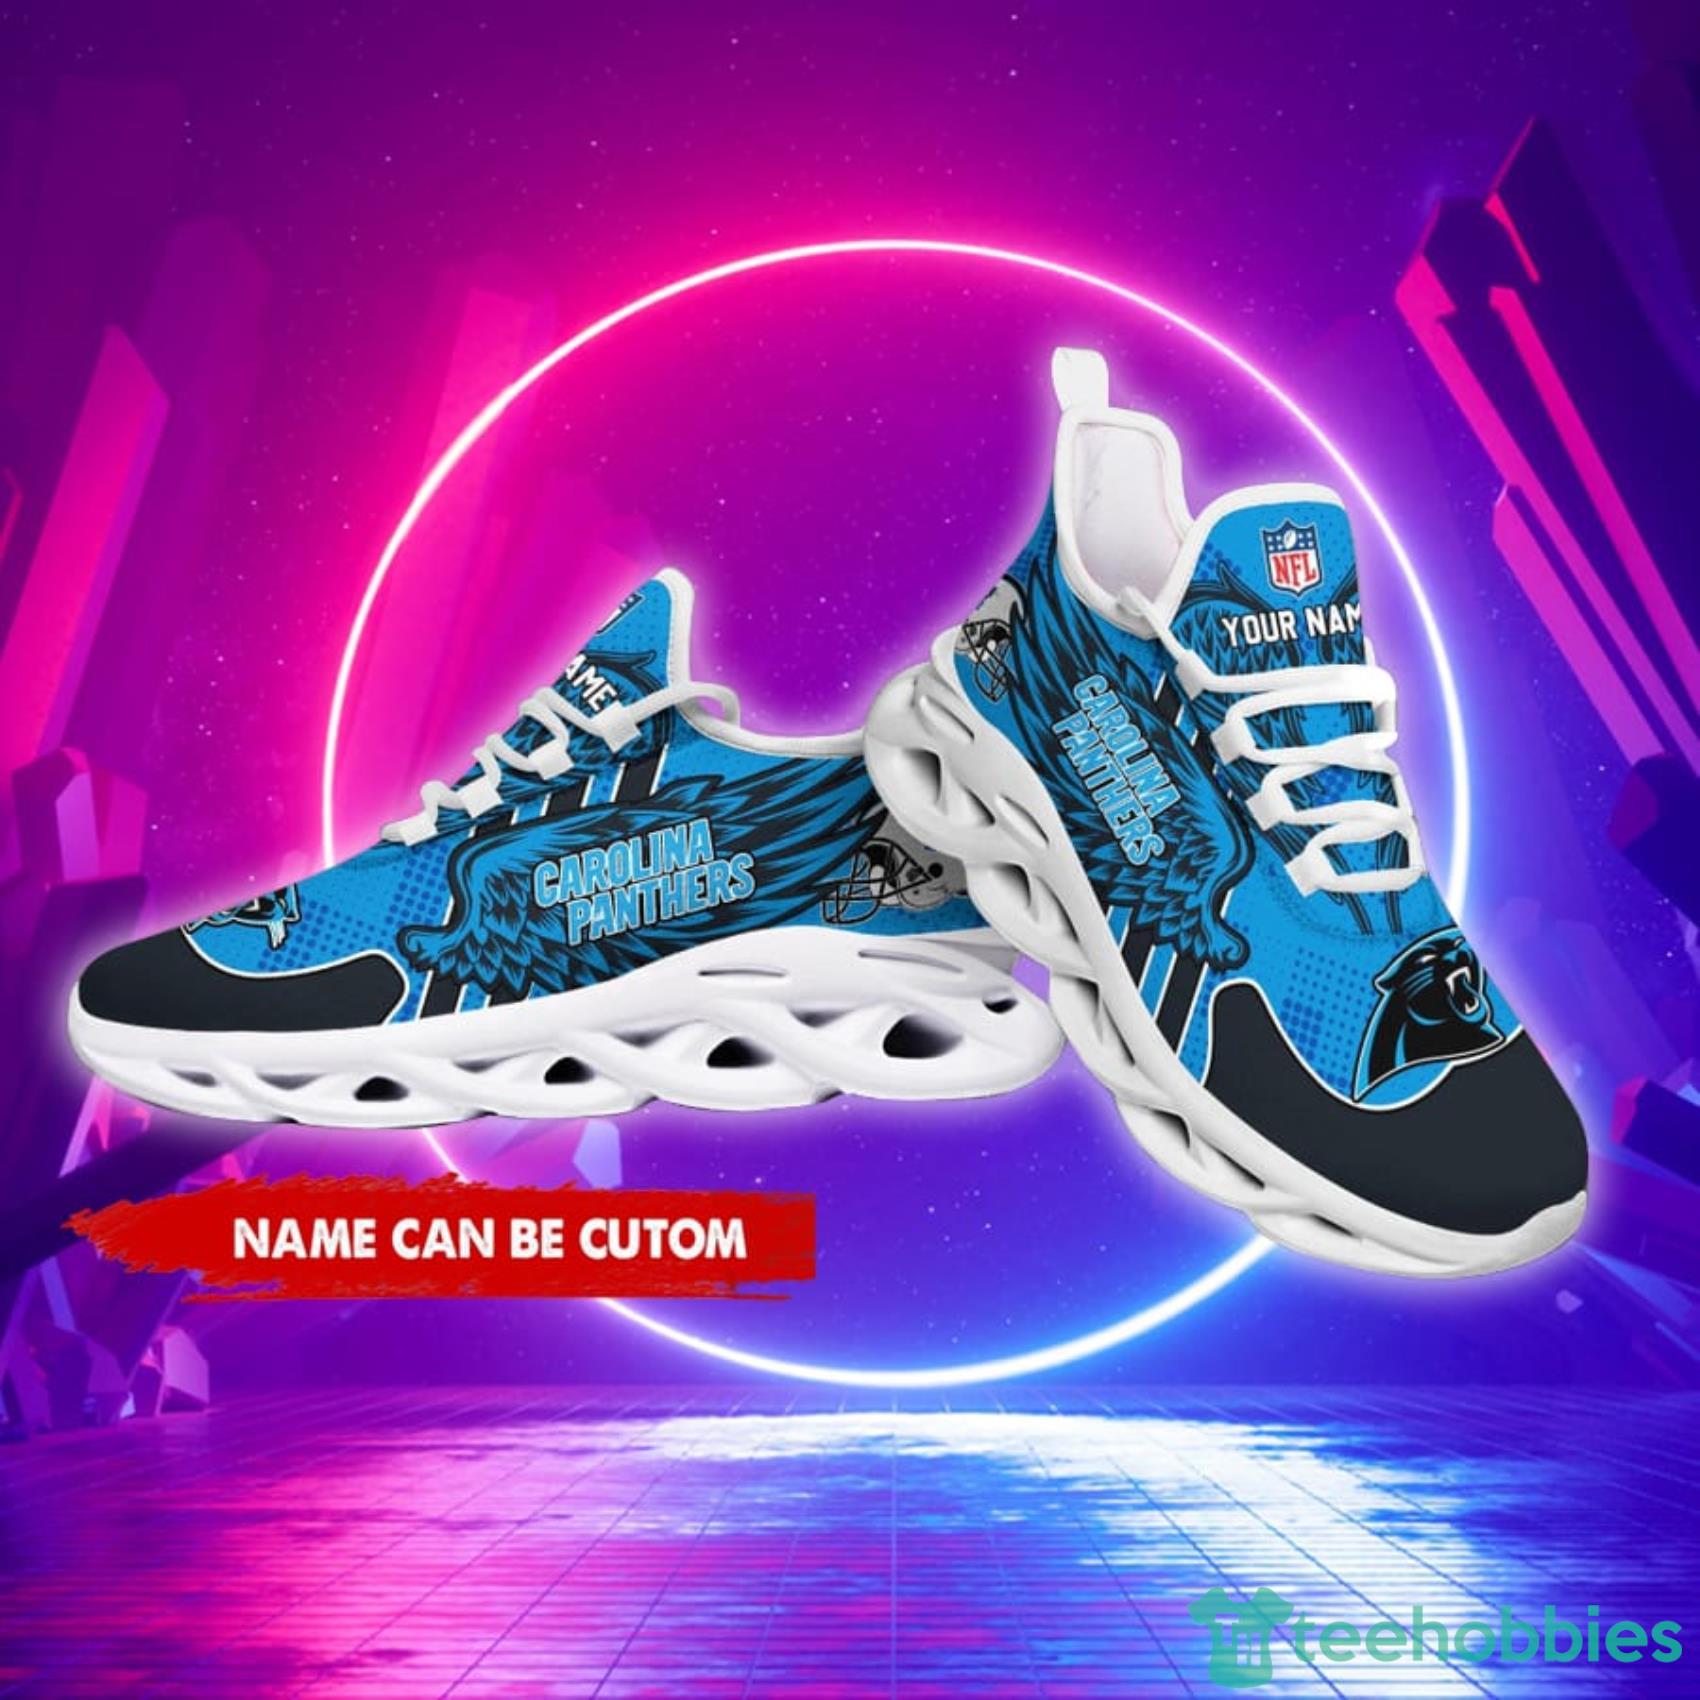 Carolina Panthers NFL Custom Name Angle Wings Max Soul Shoes Gift For Fans Product Photo 2